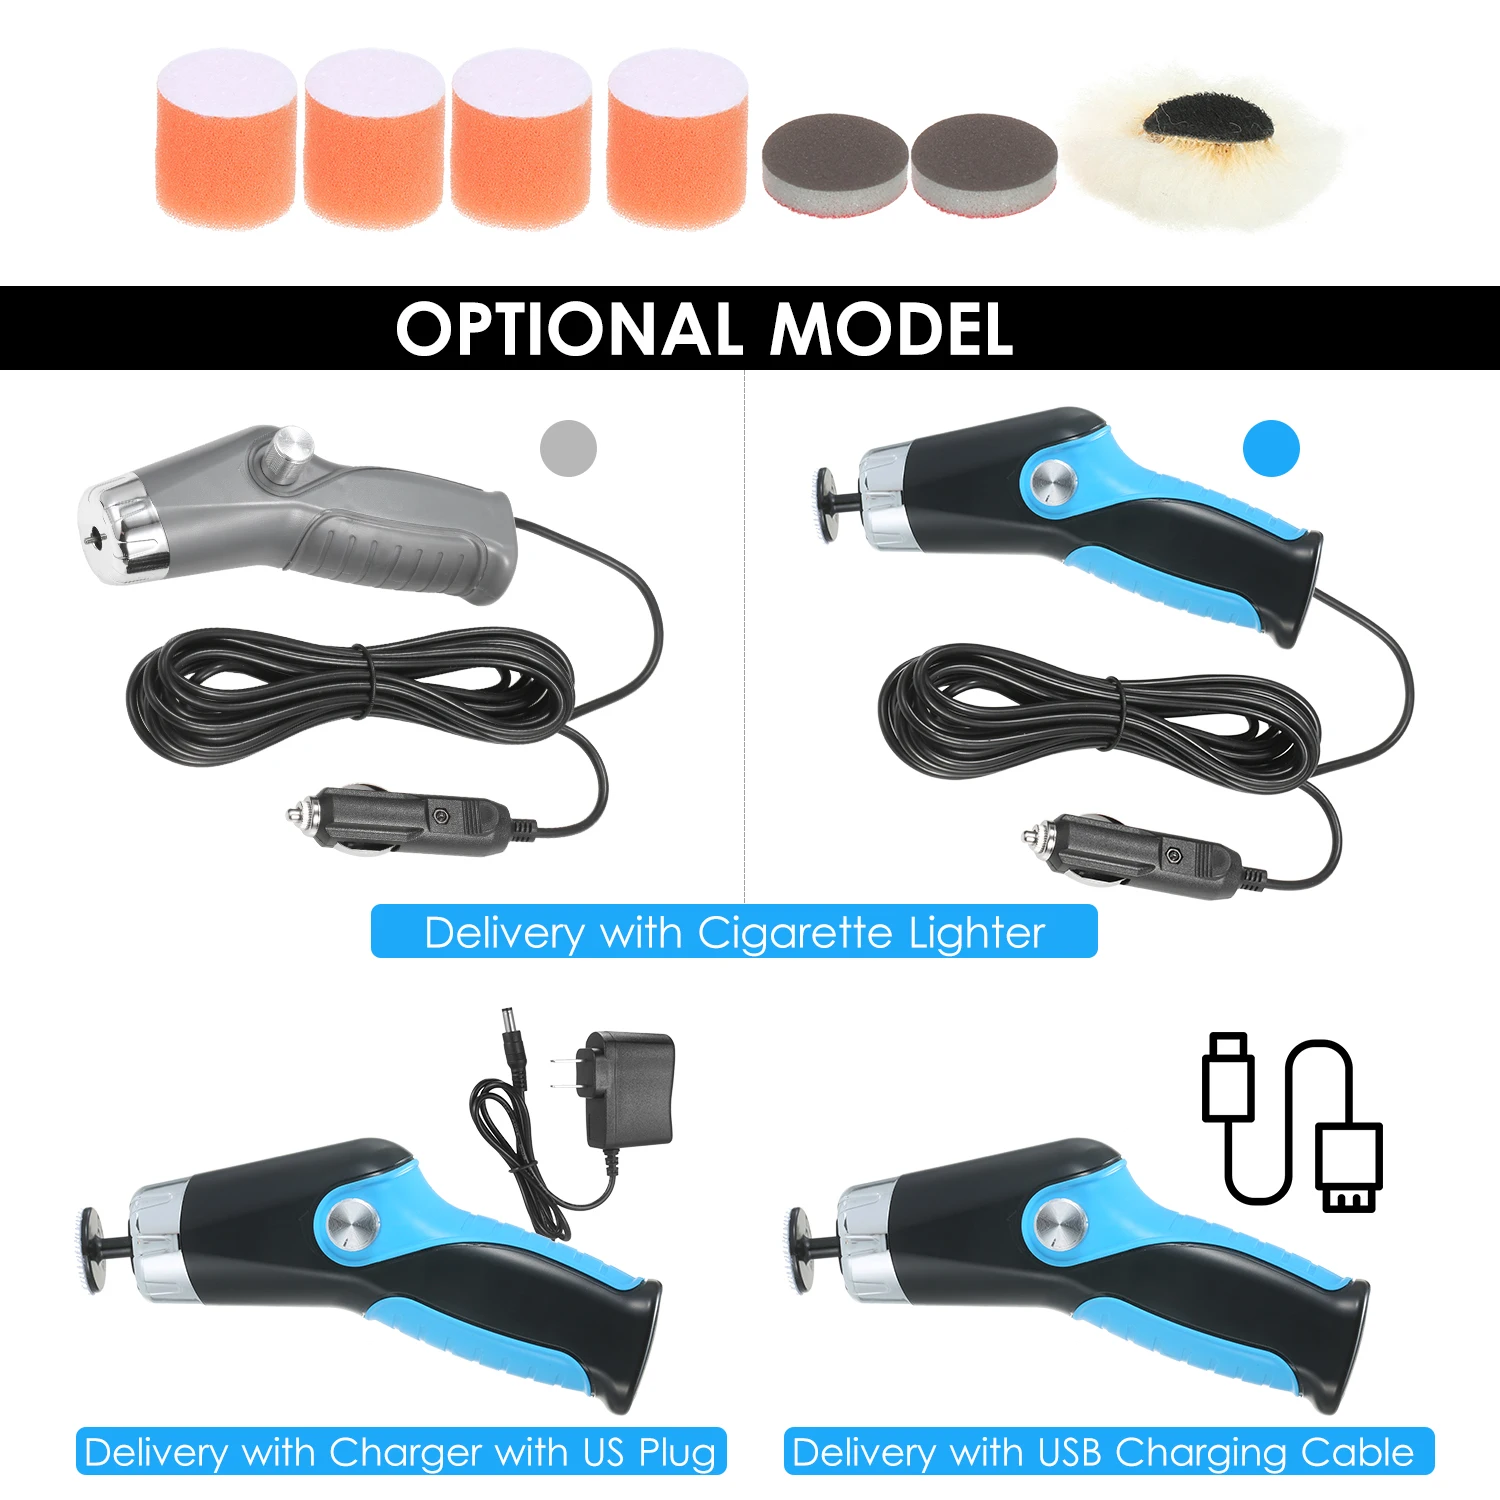 

60W Polishing Machine USB Charging Cable 8500RPM Variable Speed Car Polisher Waxing Machine Automobile Scratch Repair Tool